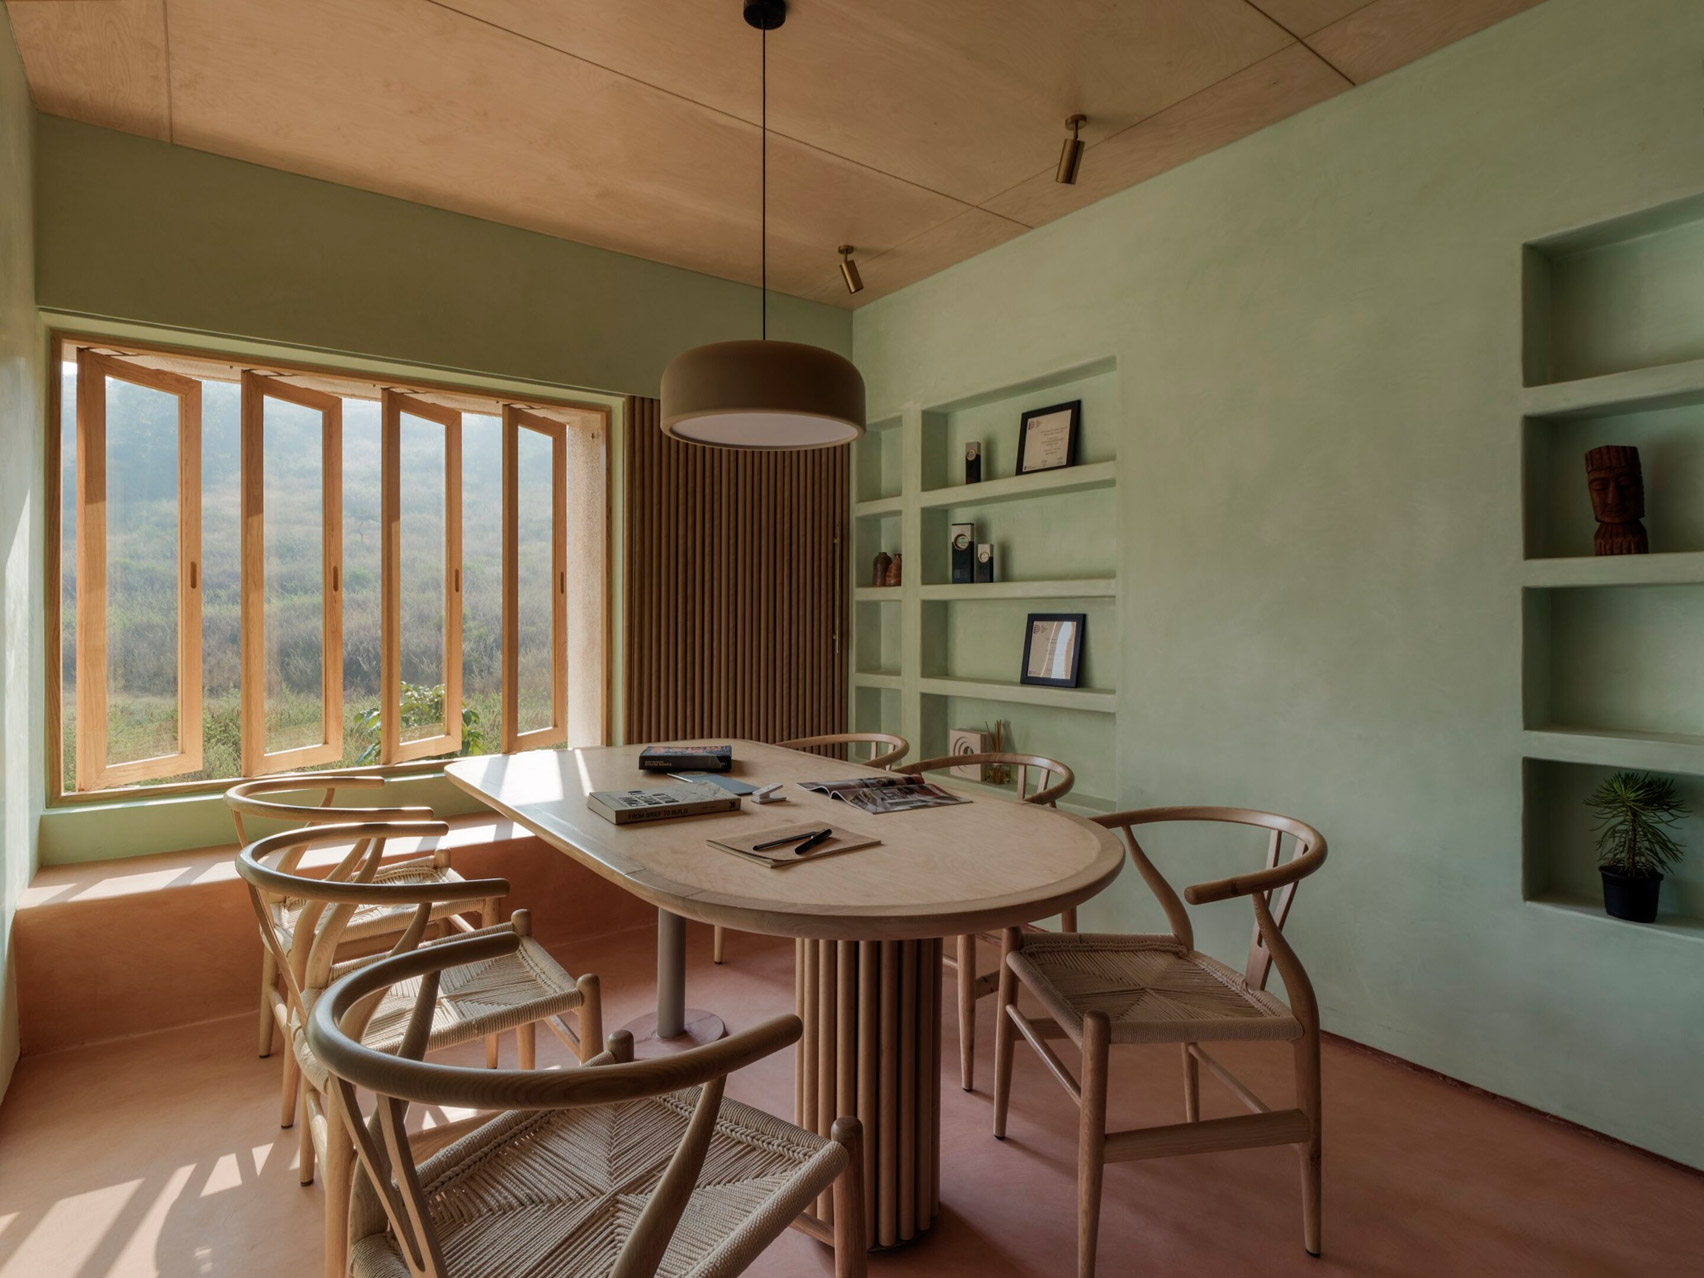 Meeting room with light green walls and wooden furnishings in studio in Pune, India